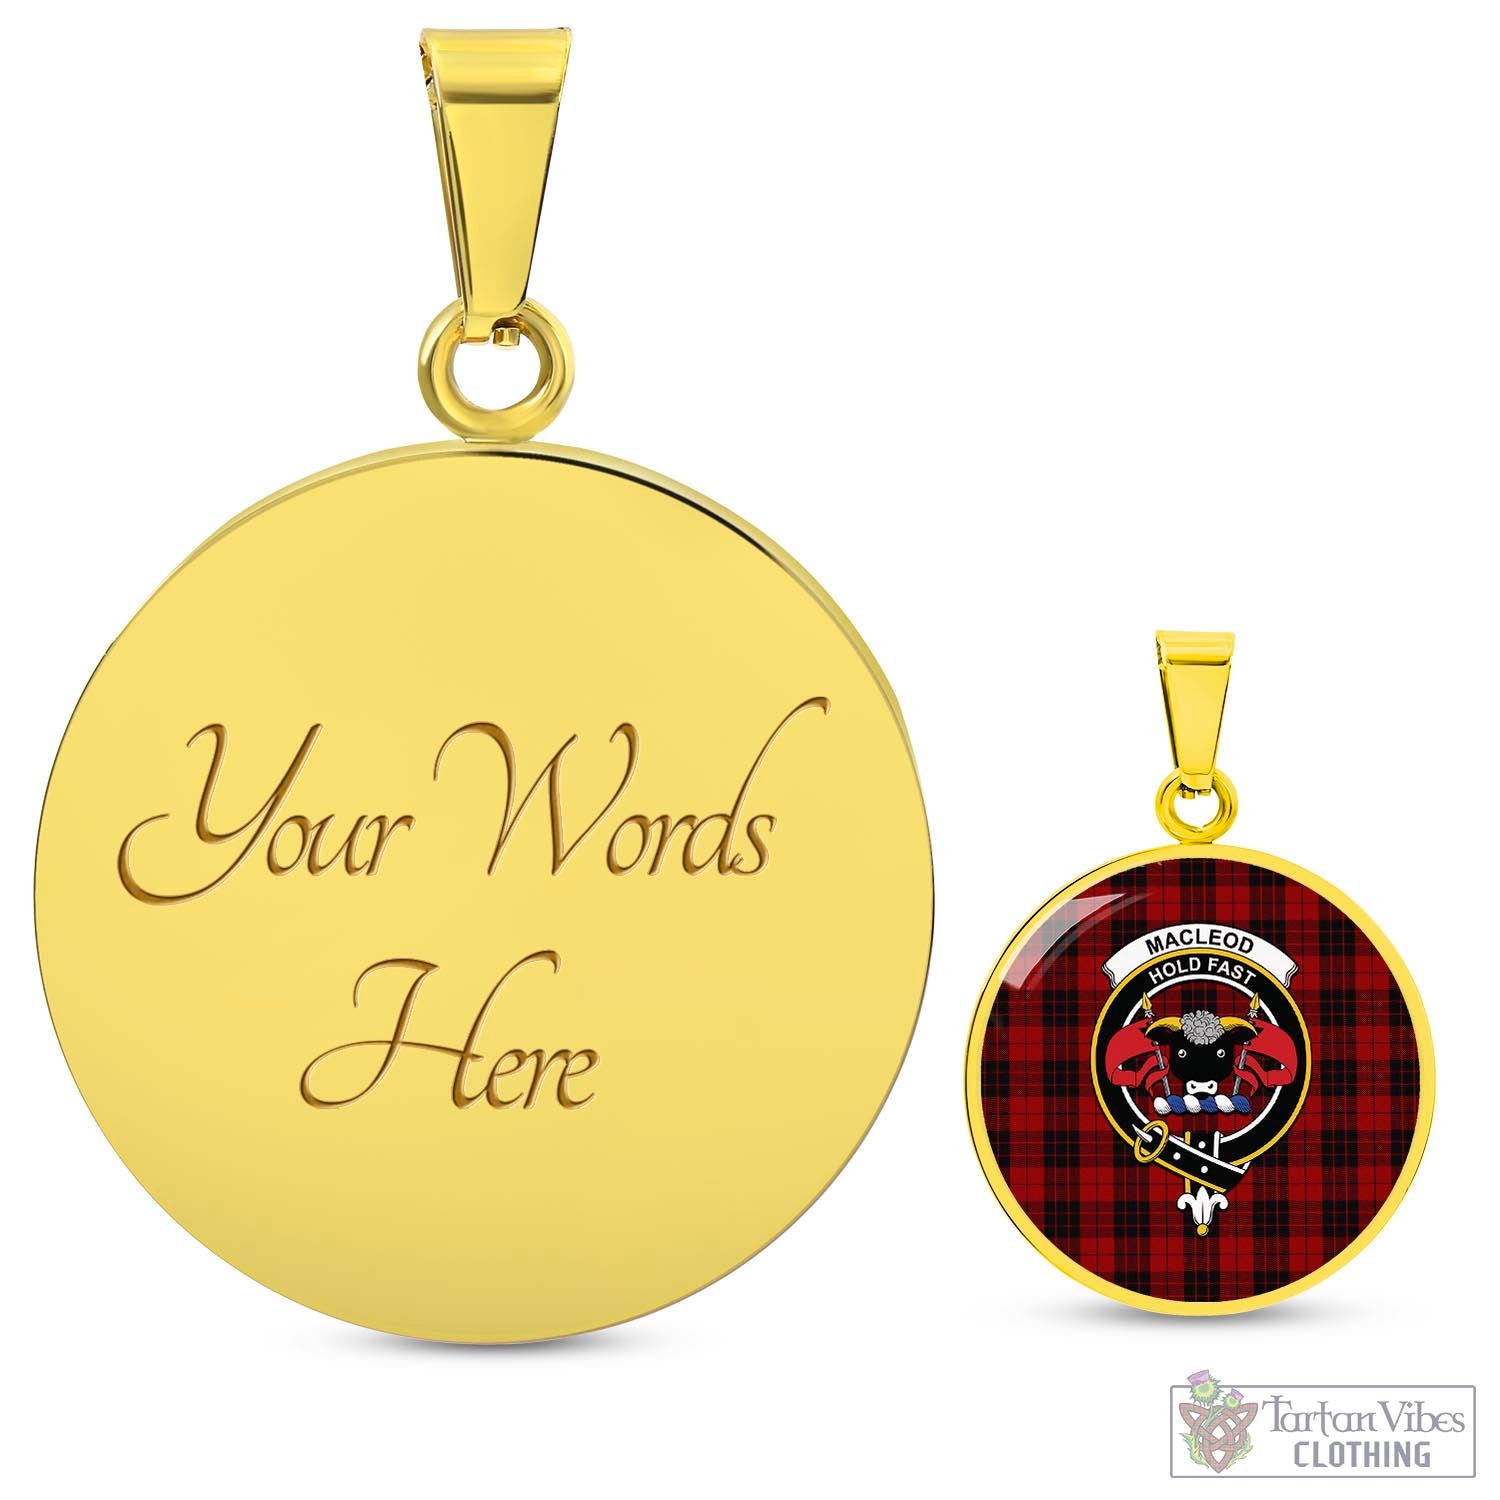 Tartan Vibes Clothing MacLeod of Raasay Highland Tartan Circle Necklace with Family Crest